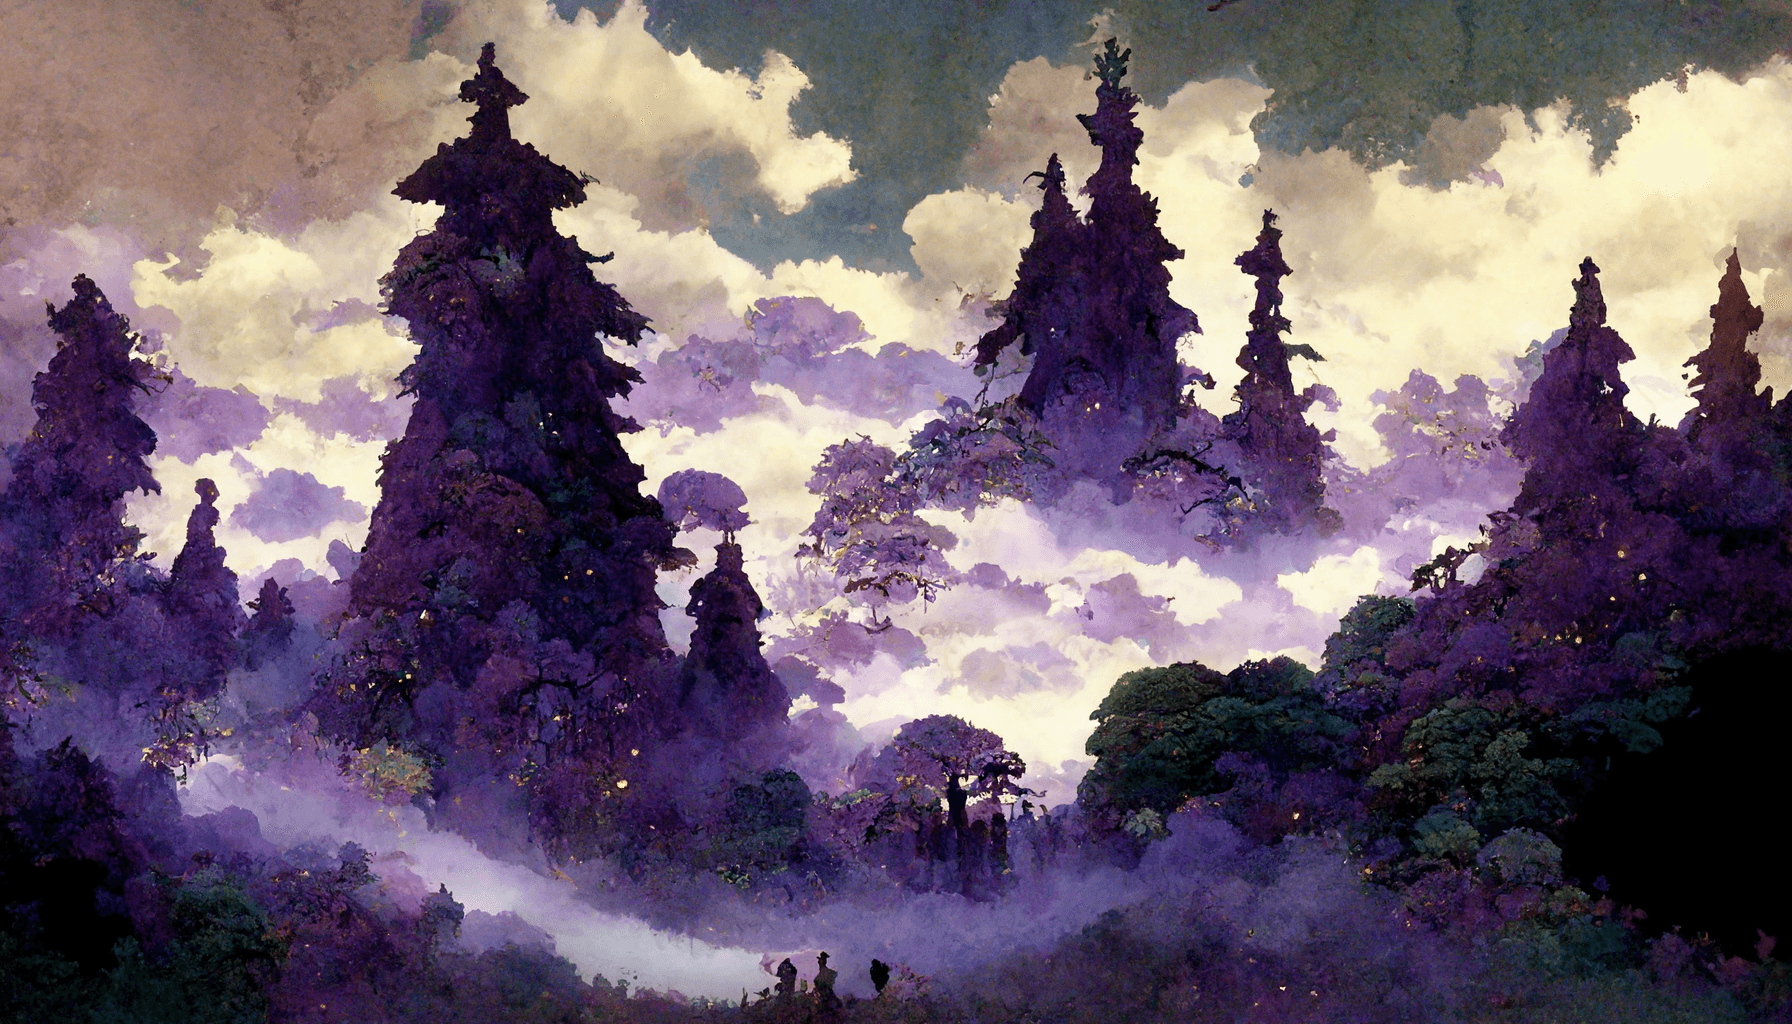 Magic Anime Forest